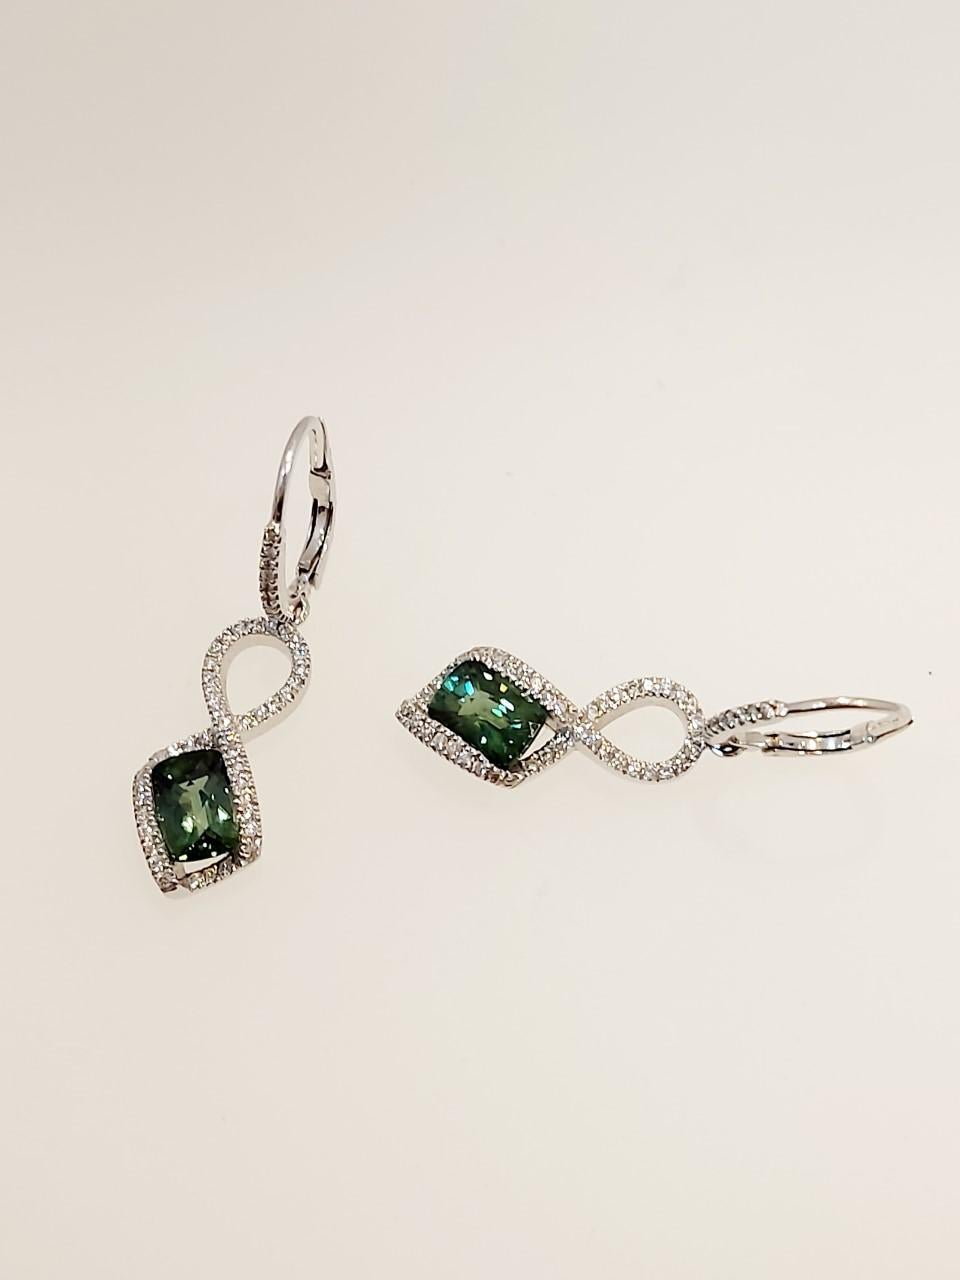 Pair of lovely green tourmaline and micro set diamond drop earrings total emerald cut tourmalines weight 2.12ct total diamond weight .47ct length of drop 34mm. Hook fitting with spring clip.